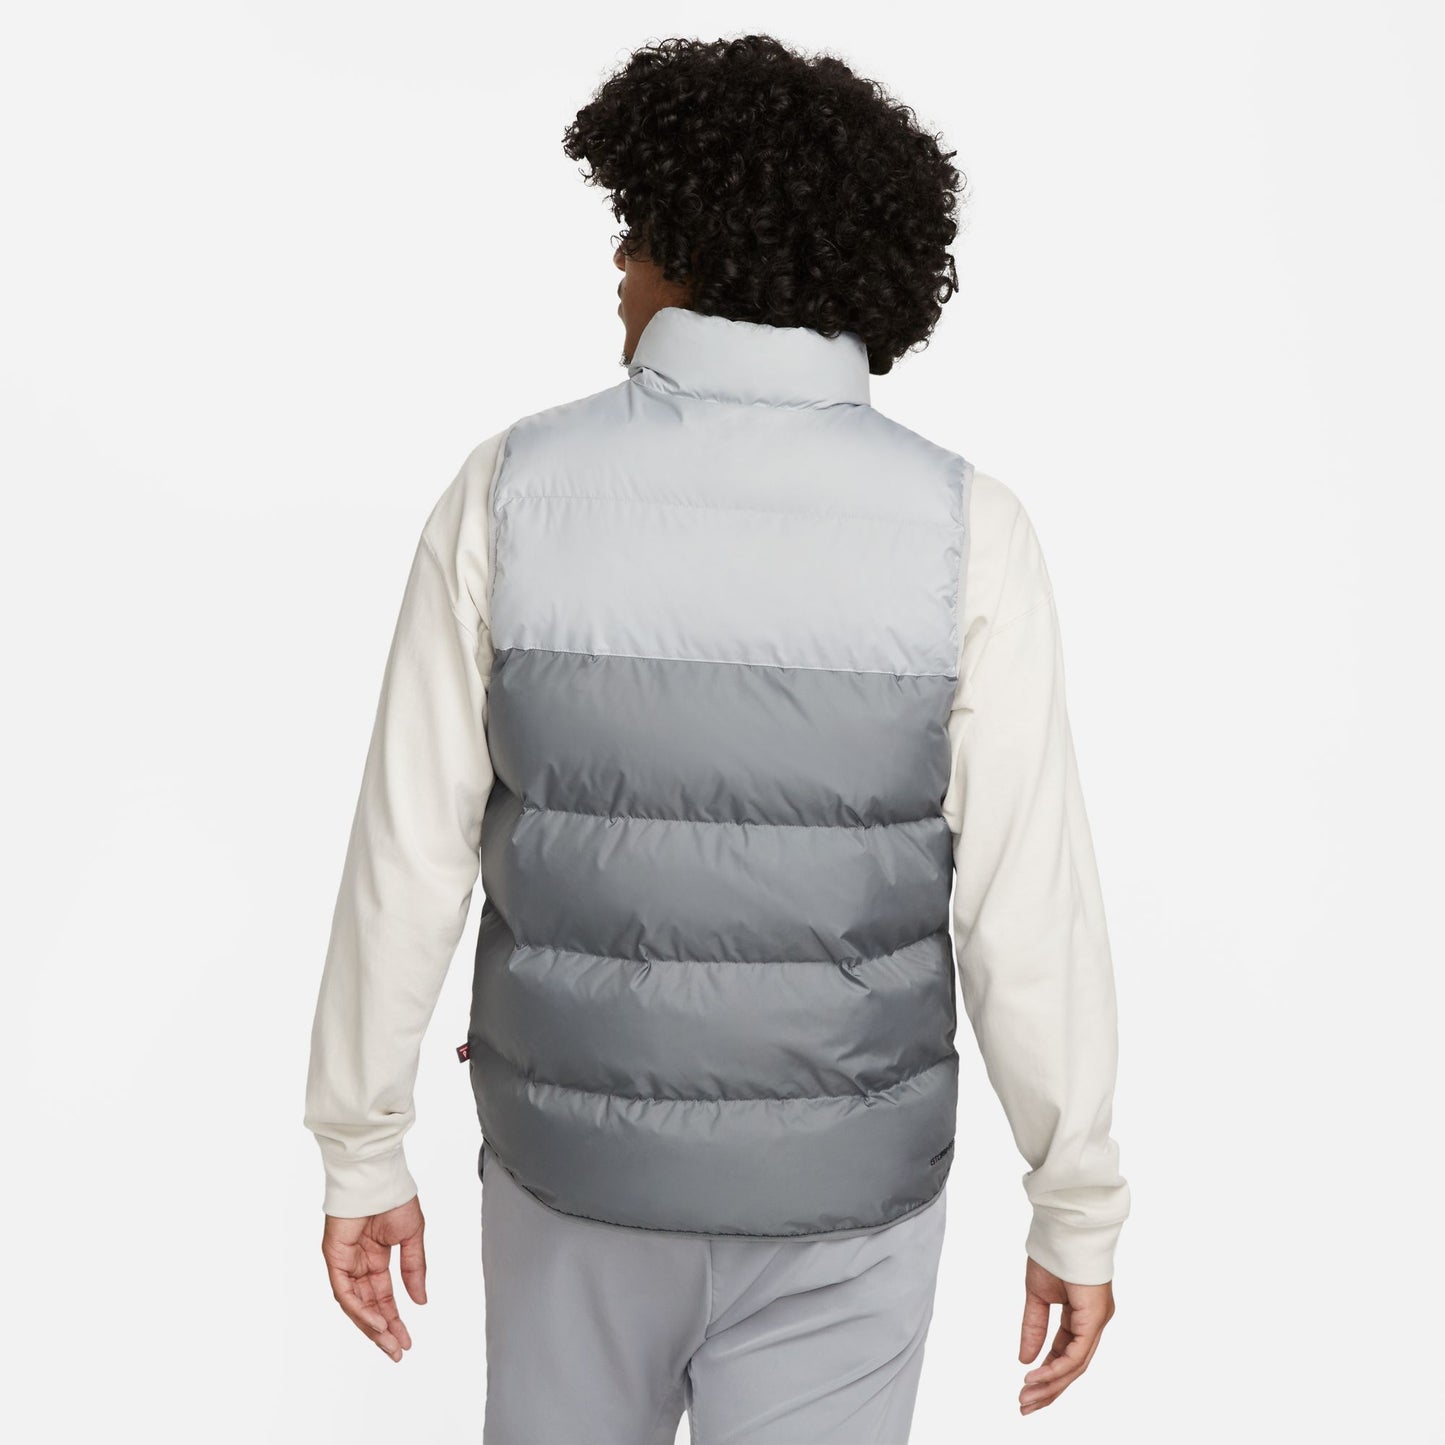 Nike Insulated Vest